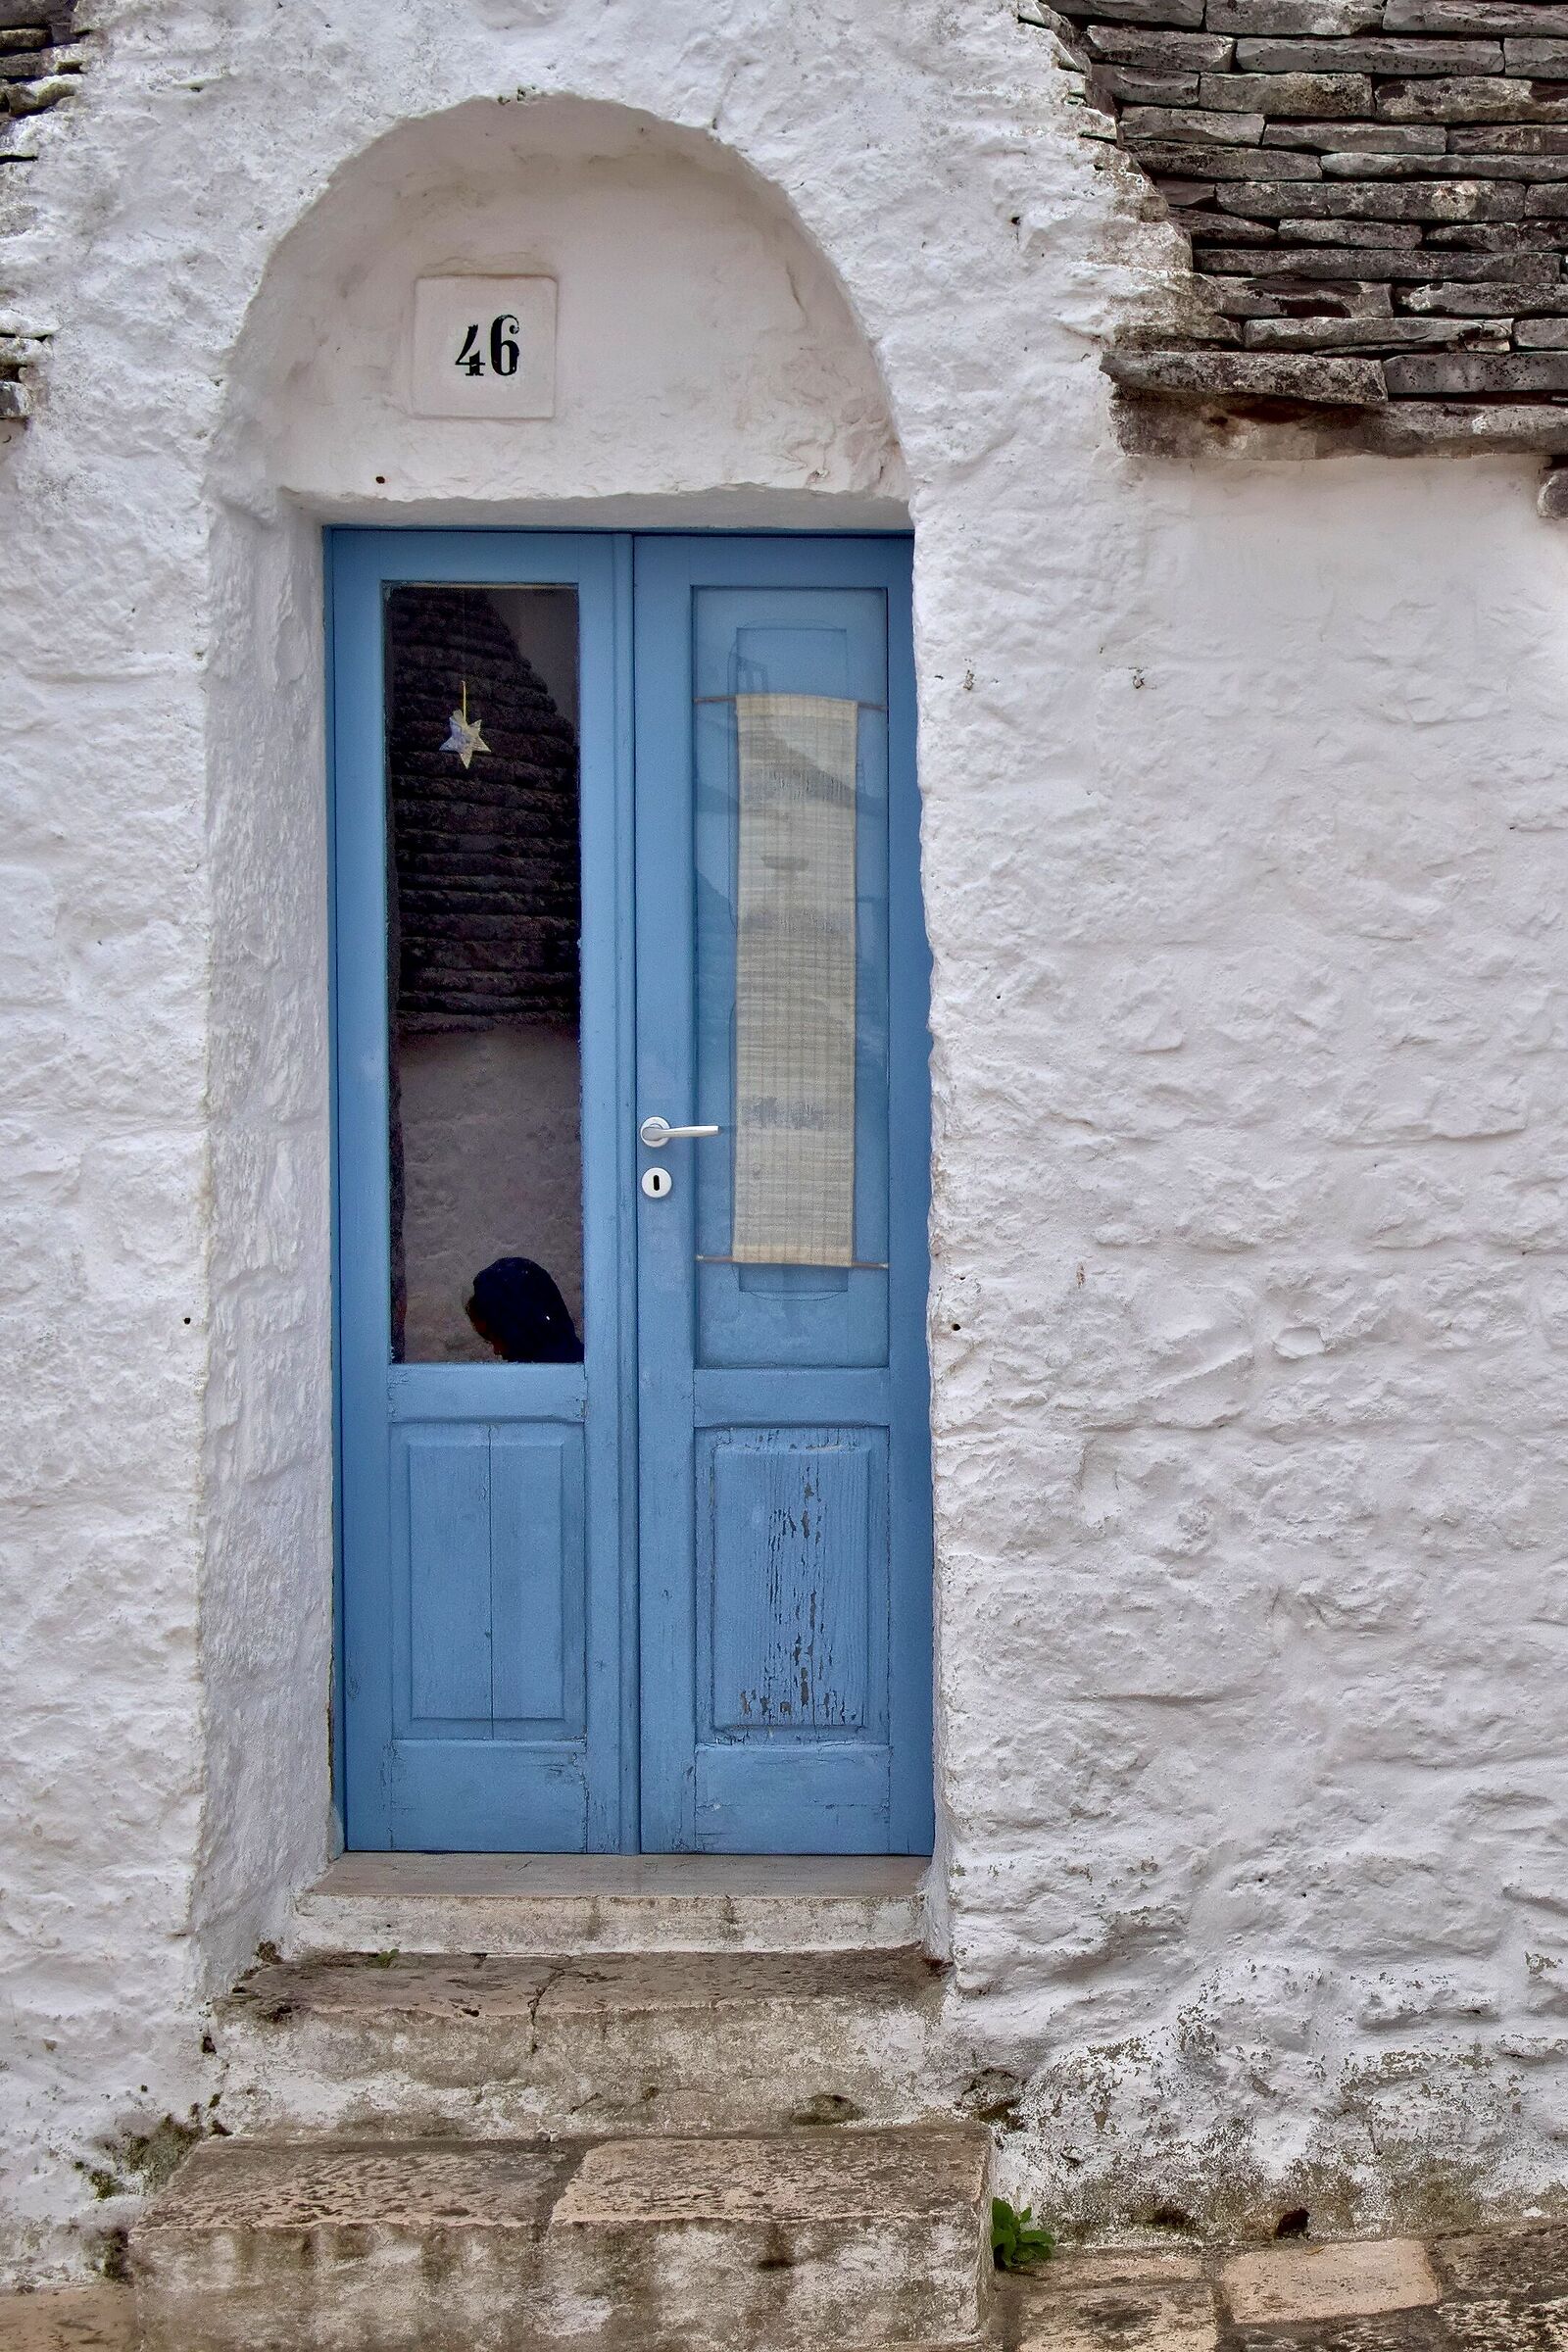 Face reflected on the door of the trullo...